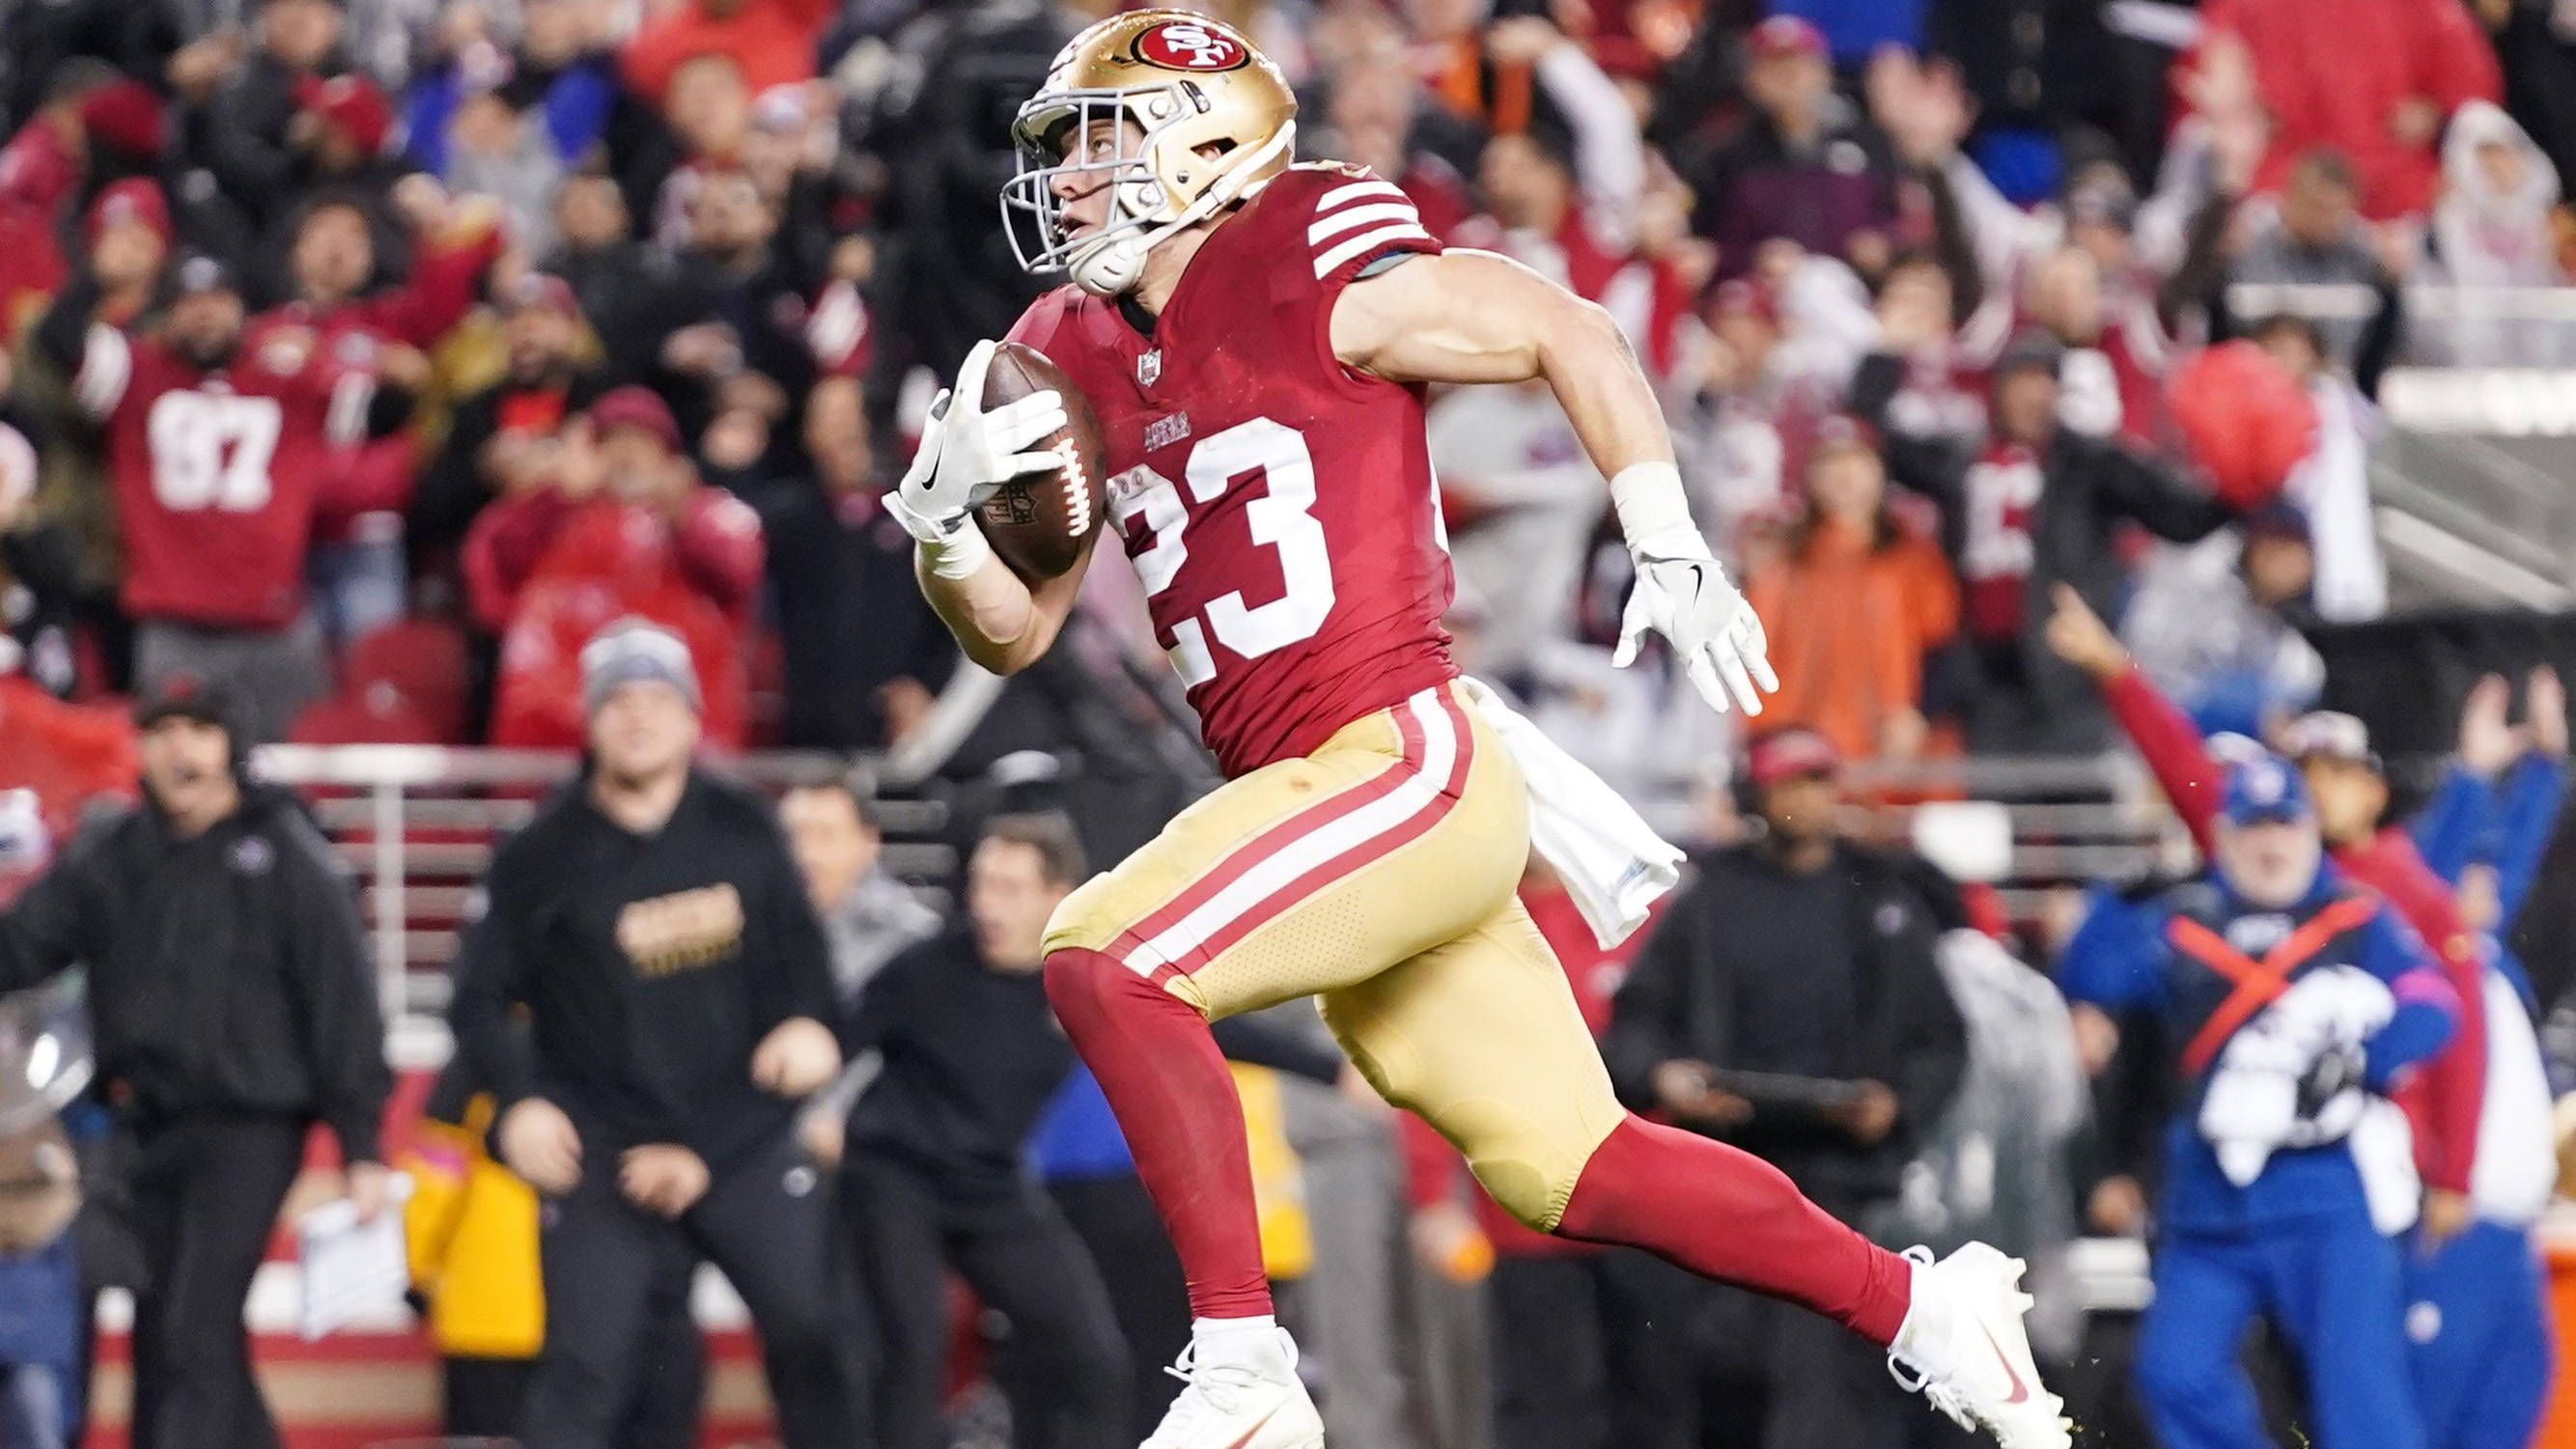 <strong>Offensive Player of the Year</strong> <br>Christian McCaffrey, San Francisco 49ers, Running Back<br><strong>Wahlergebnis mit Punkteabstufung 5-3-1:</strong> <br>1. CMC, 39-8-3 = 222; <br>2. Tyreek Hill, Wide Receiver, Dolphins, 7-32-8 = 139<br>3. CeeDee Lamb, Wide Receiver, Cowboys, 1-4-28 = 45;<br>4. Lamar Jackson, 3-3-8 = 32<br>5. Dak Prescott, 0-1-2 = 5